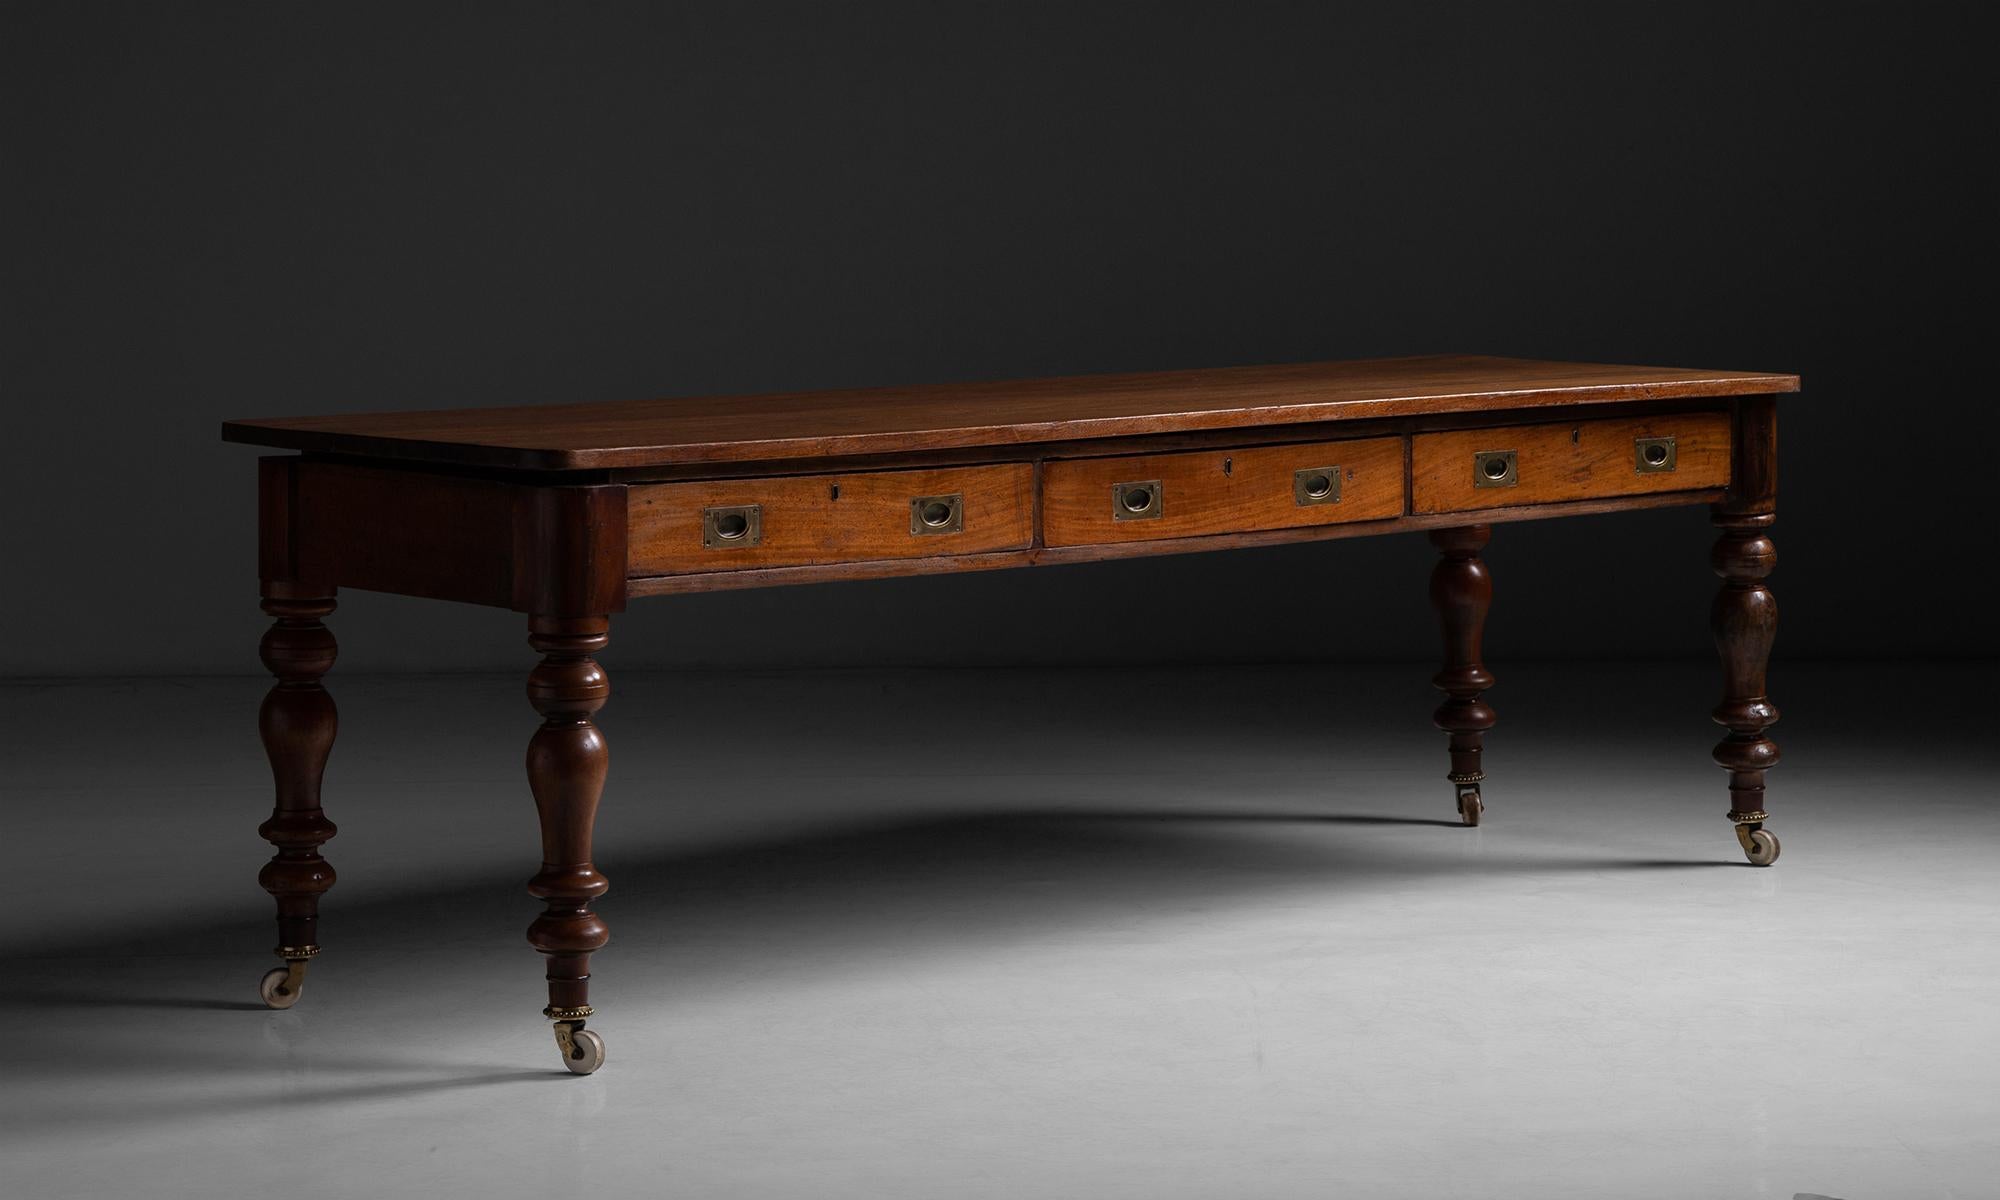 Mahogany Campaign Table, England, circa 1860

Collapsible campaign table with original brass hardware

Measures 101”L x 31”d x 32.75”h